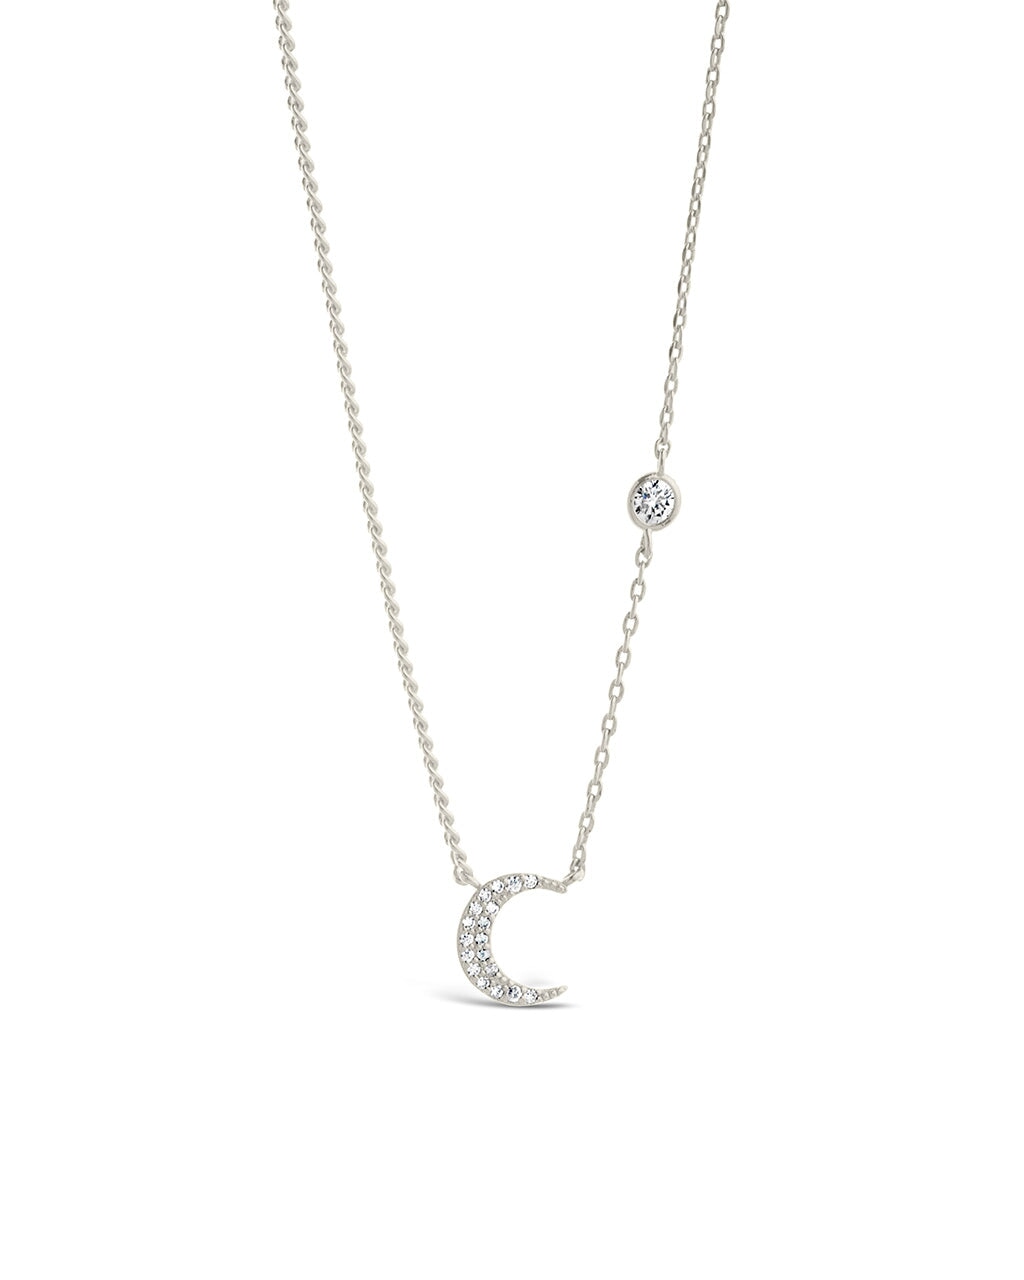 Crystal Crescent Moon Necklace Necklace Sterling Forever 